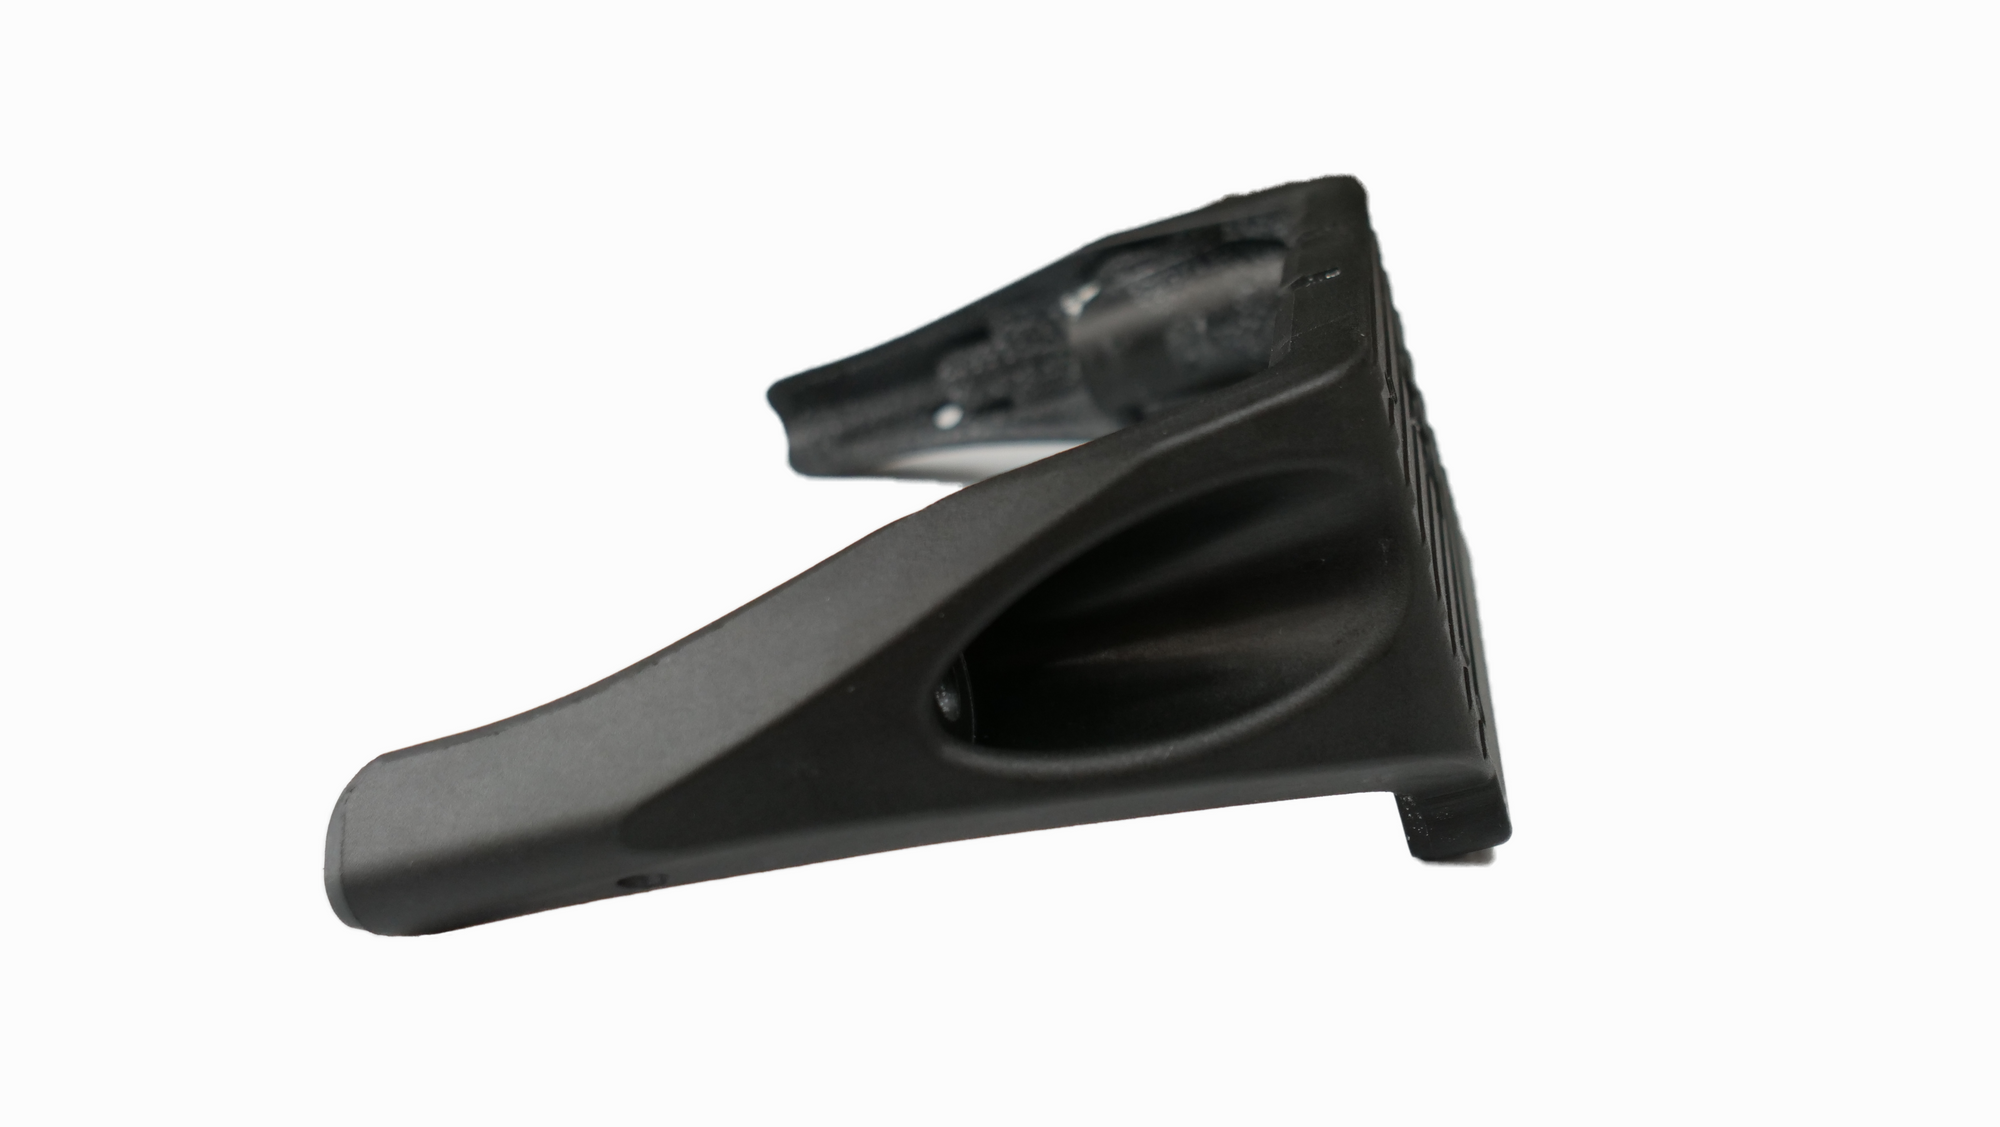 Front U-Deck Cover for the EMOVE Cruiser Electric Scooter